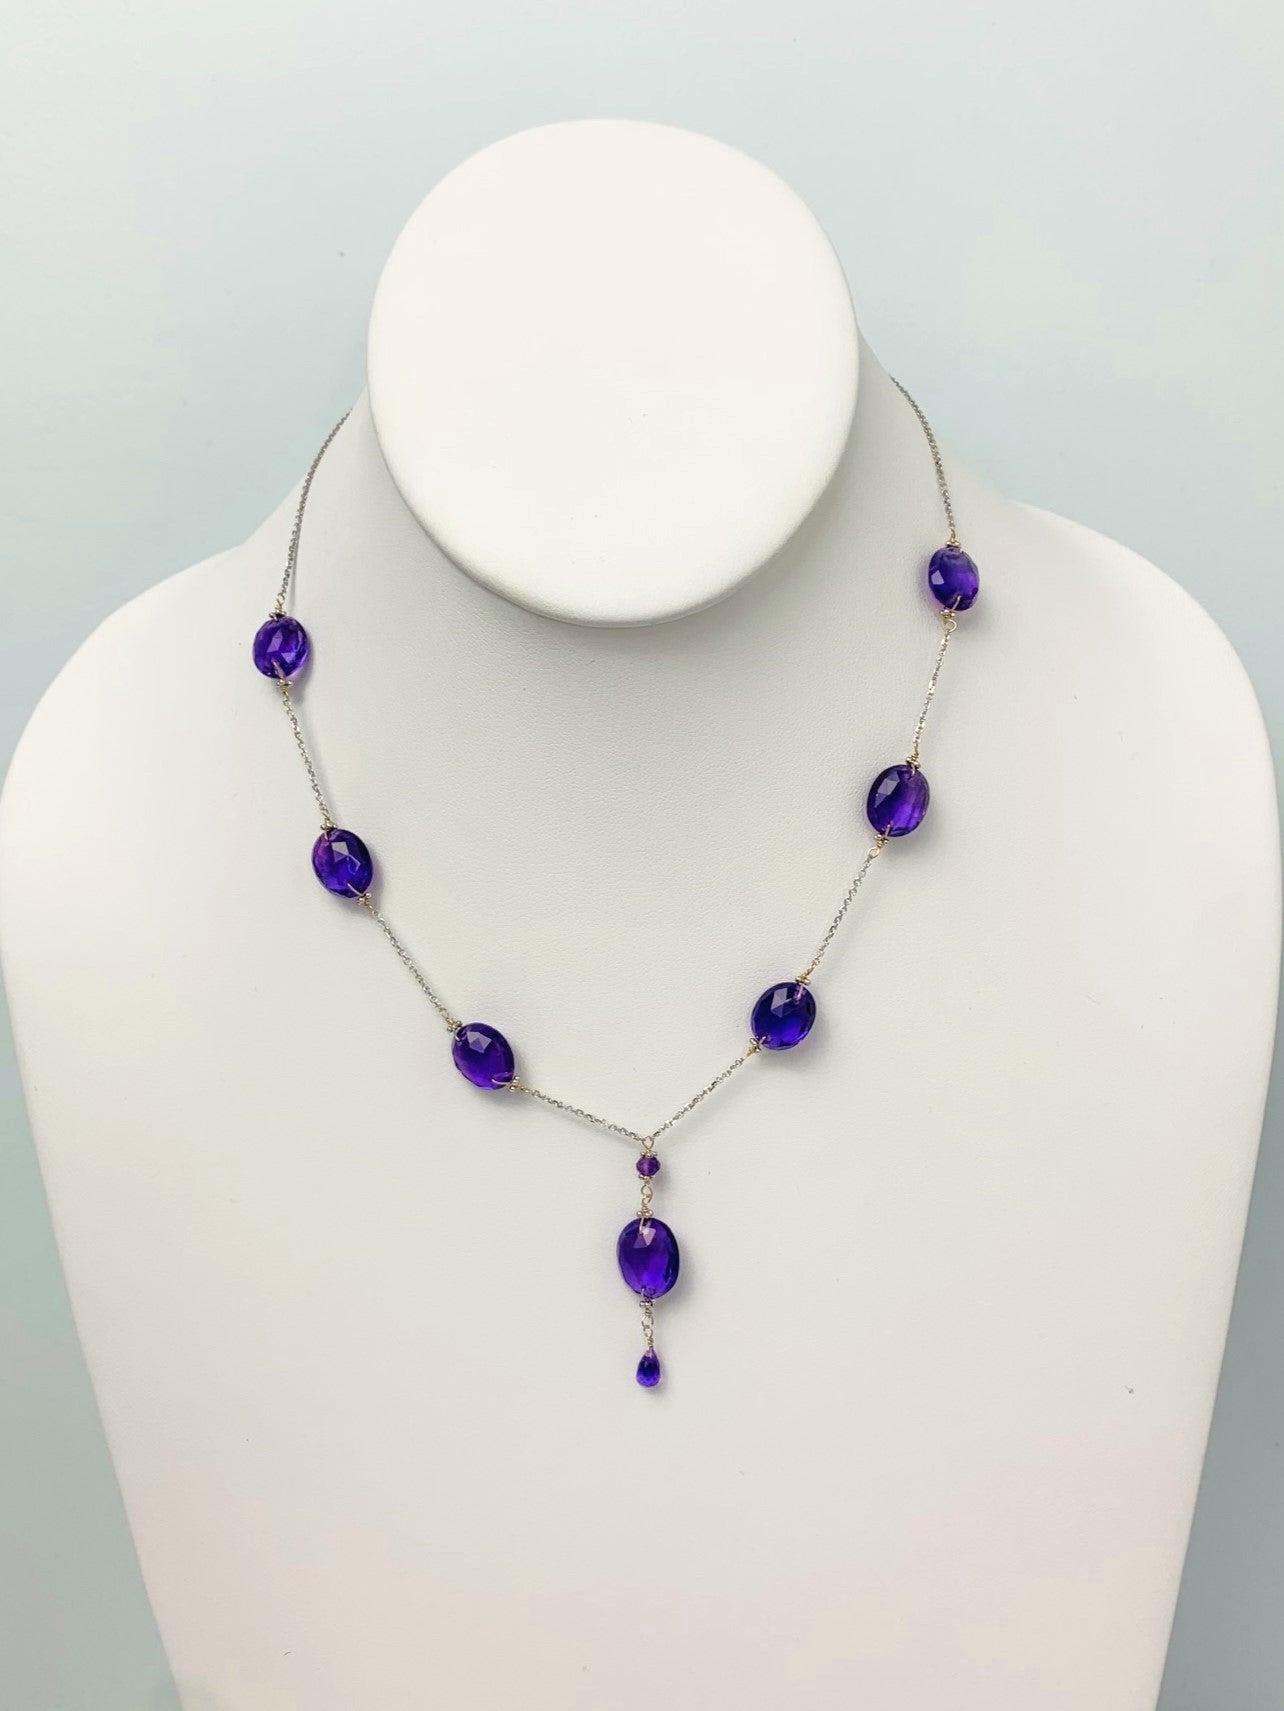 16" Amethyst Station Necklace With Oval Checkerboard And Briolette Tassel Drop in 14KW - NCK-369A-TASTNCGM14W-AMY-16